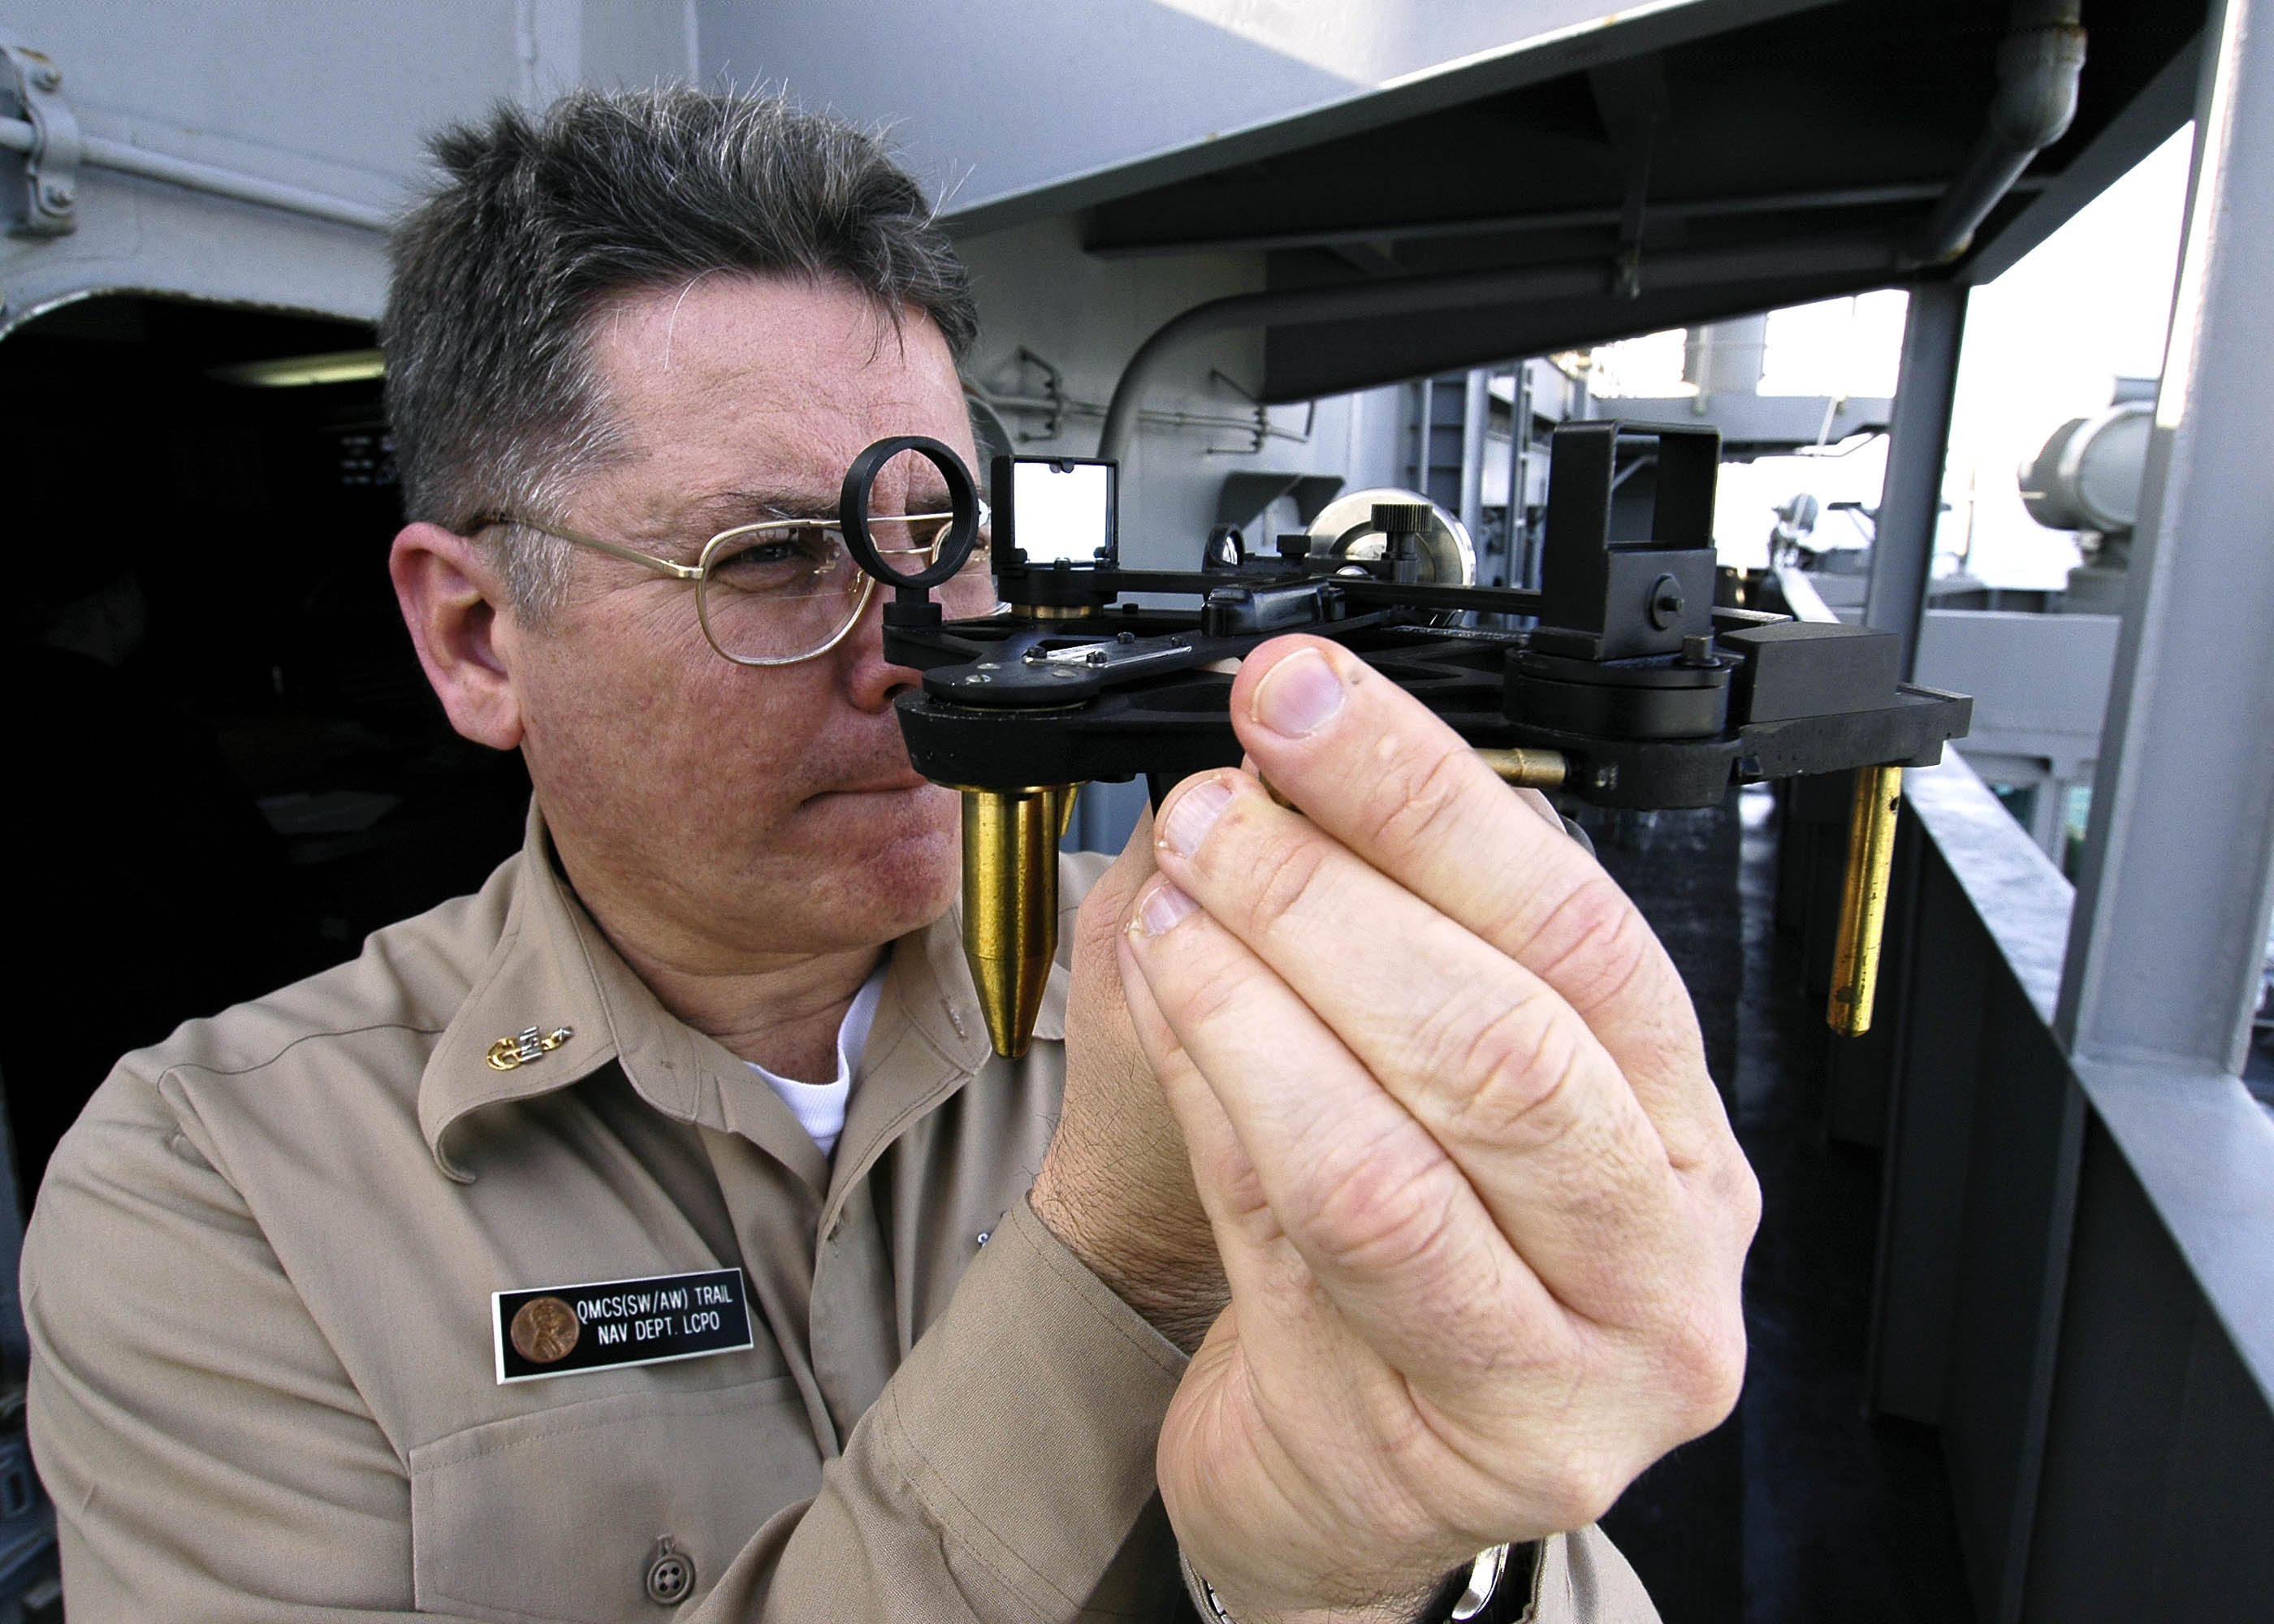 US Navy 060403-N-7981E-085 Senior Chief Quartermaster John Trail demonstrates the use of a stadimeter, a navigational instrument used to determine the distance from one object to another